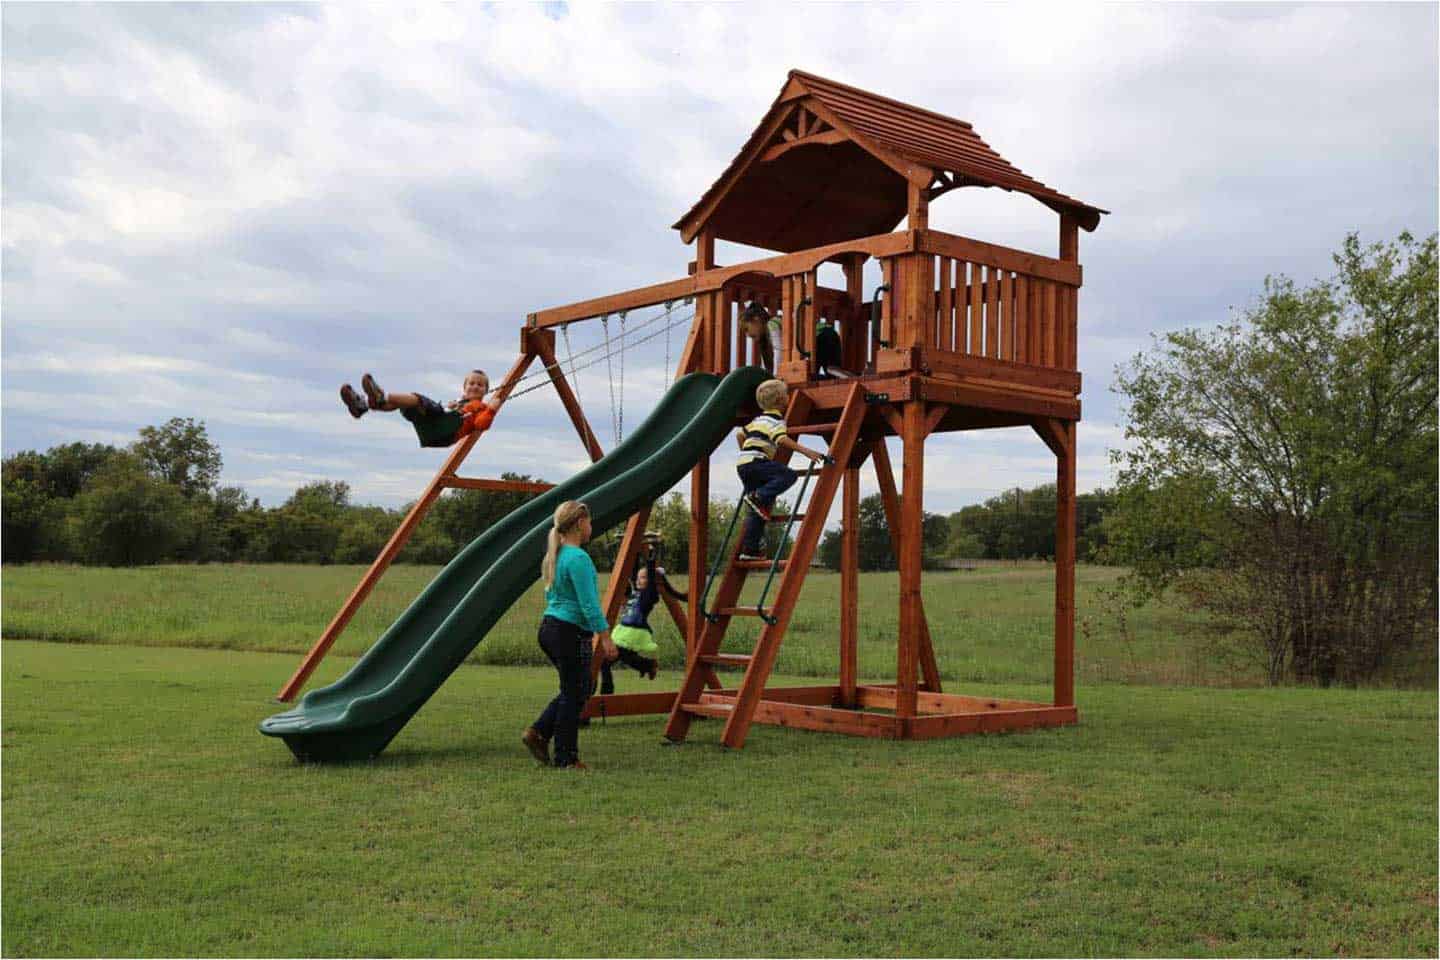 fort stockton swing set with open slat fort, avalanche slide, swings, and ladder